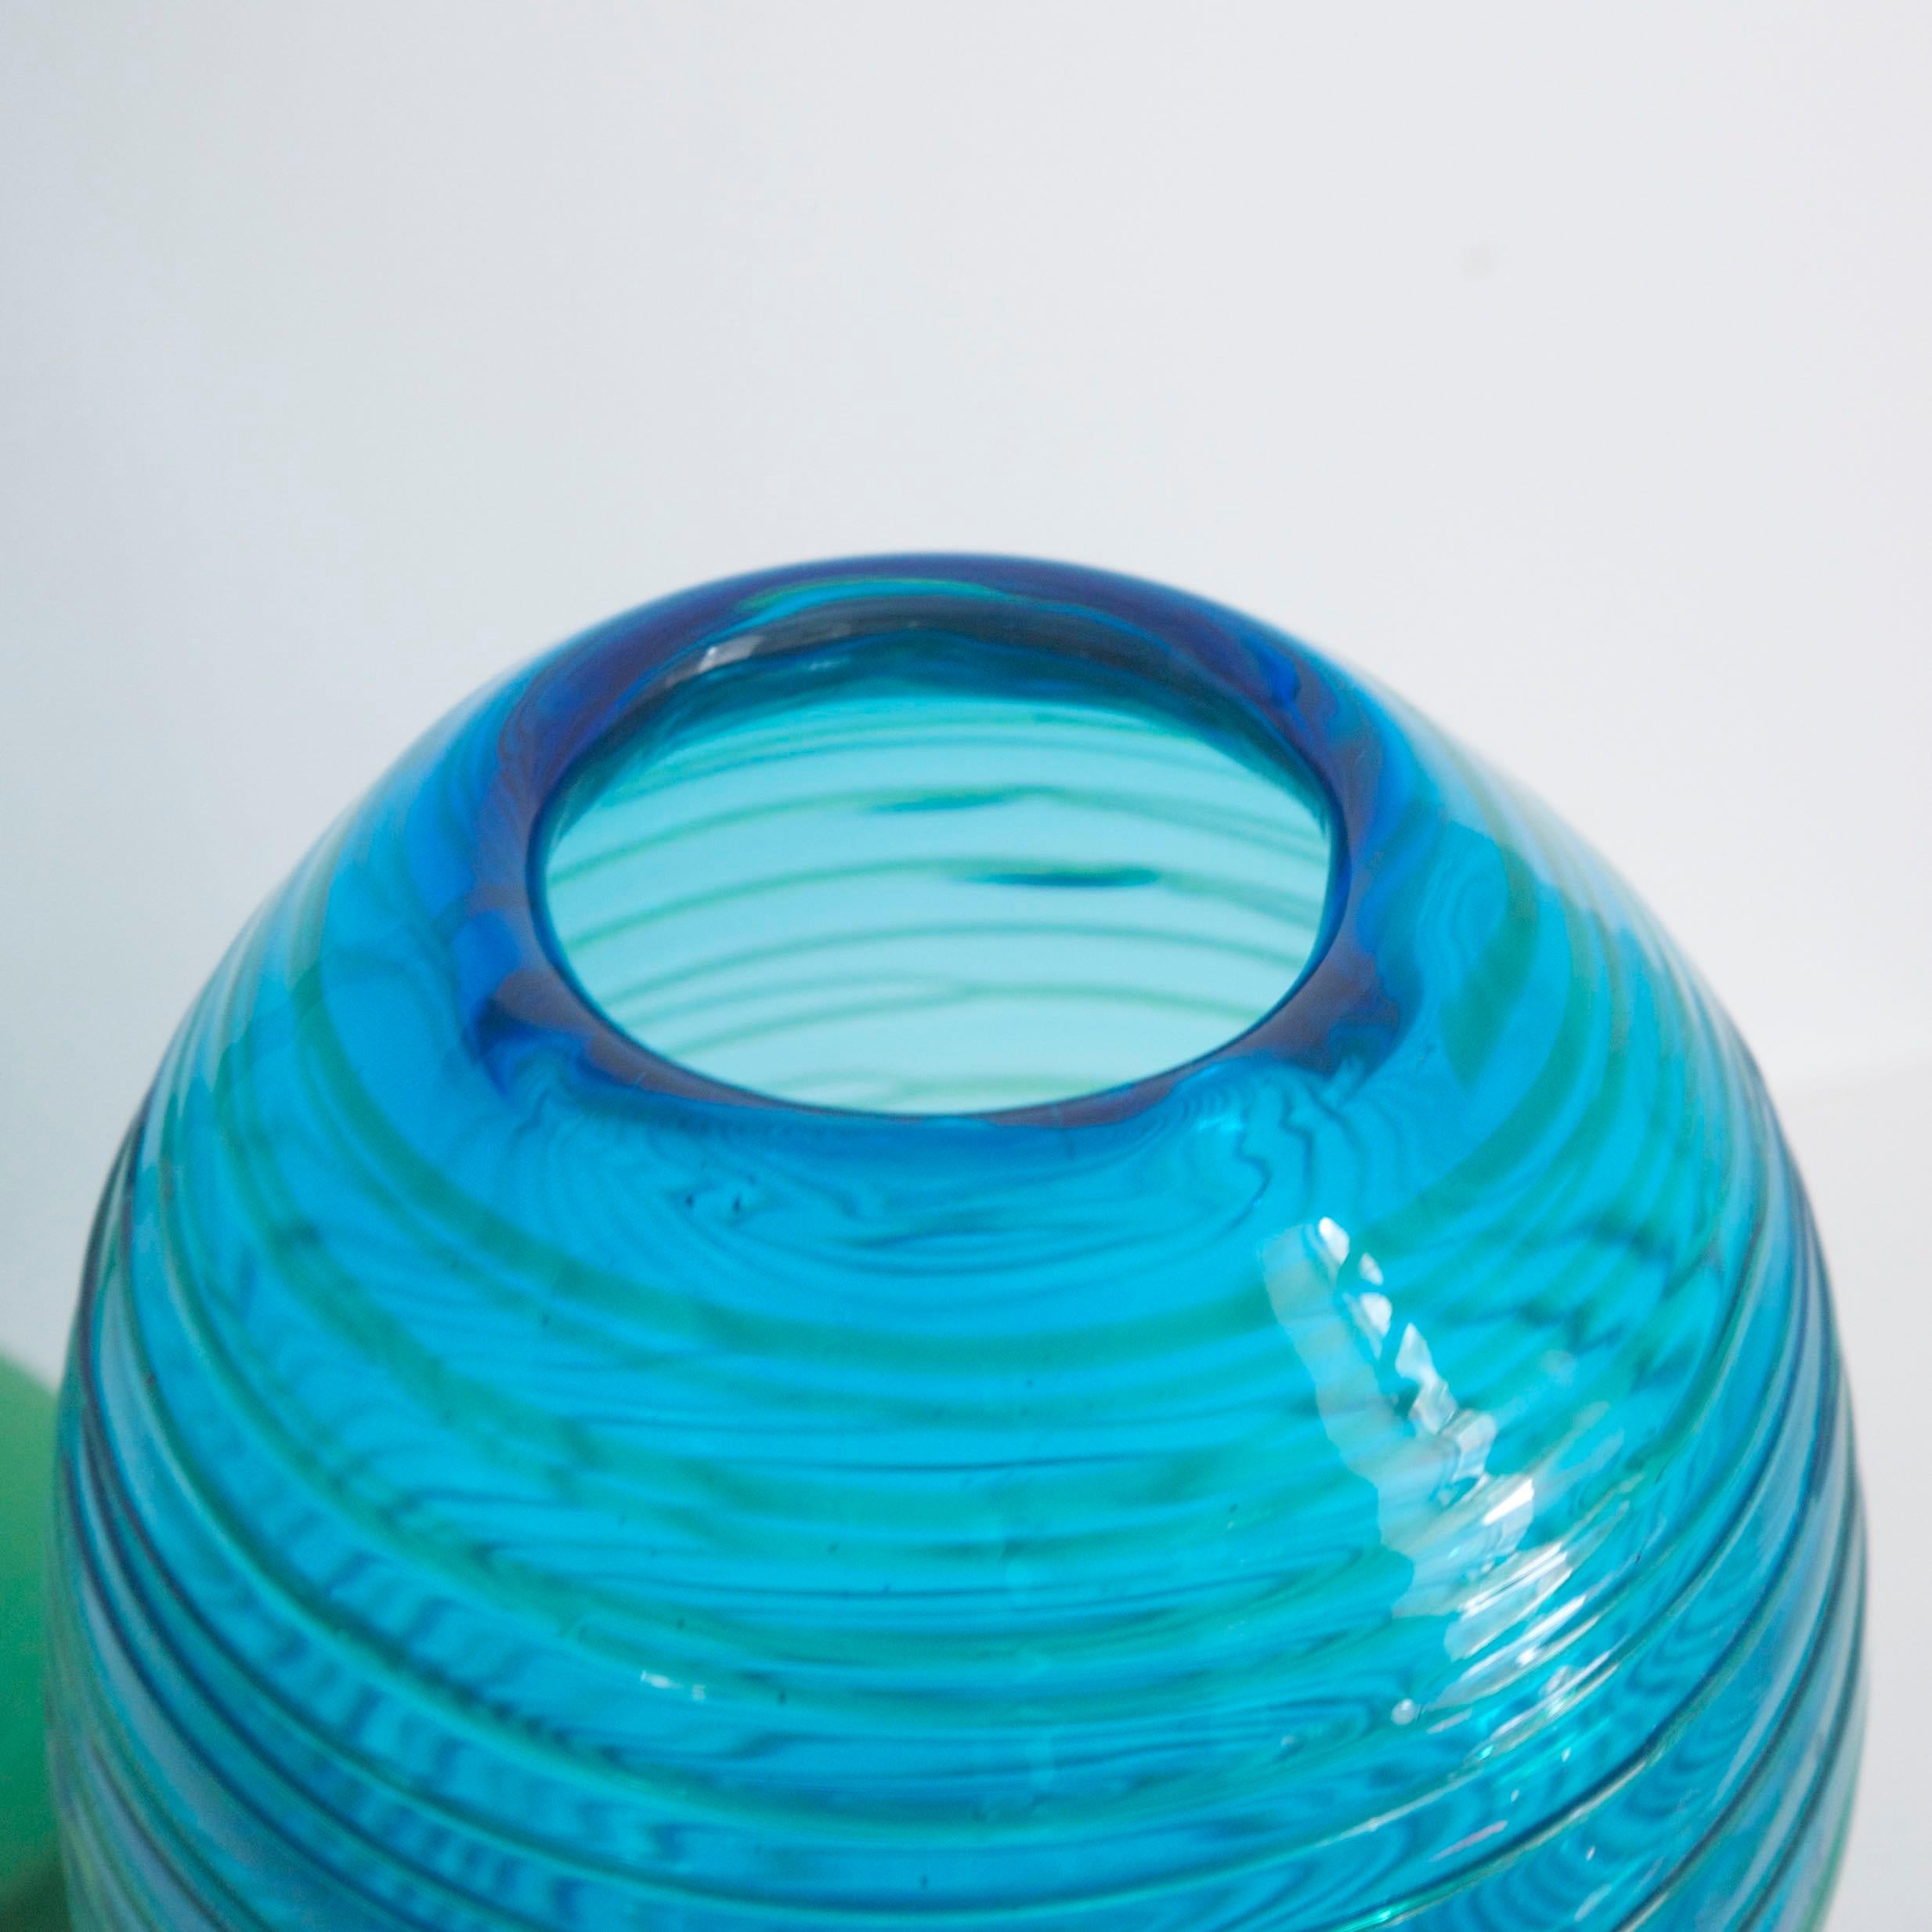 Italian Fulvio Bianconi for Venini 1970s Turquoise Vase with Applied Lines For Sale